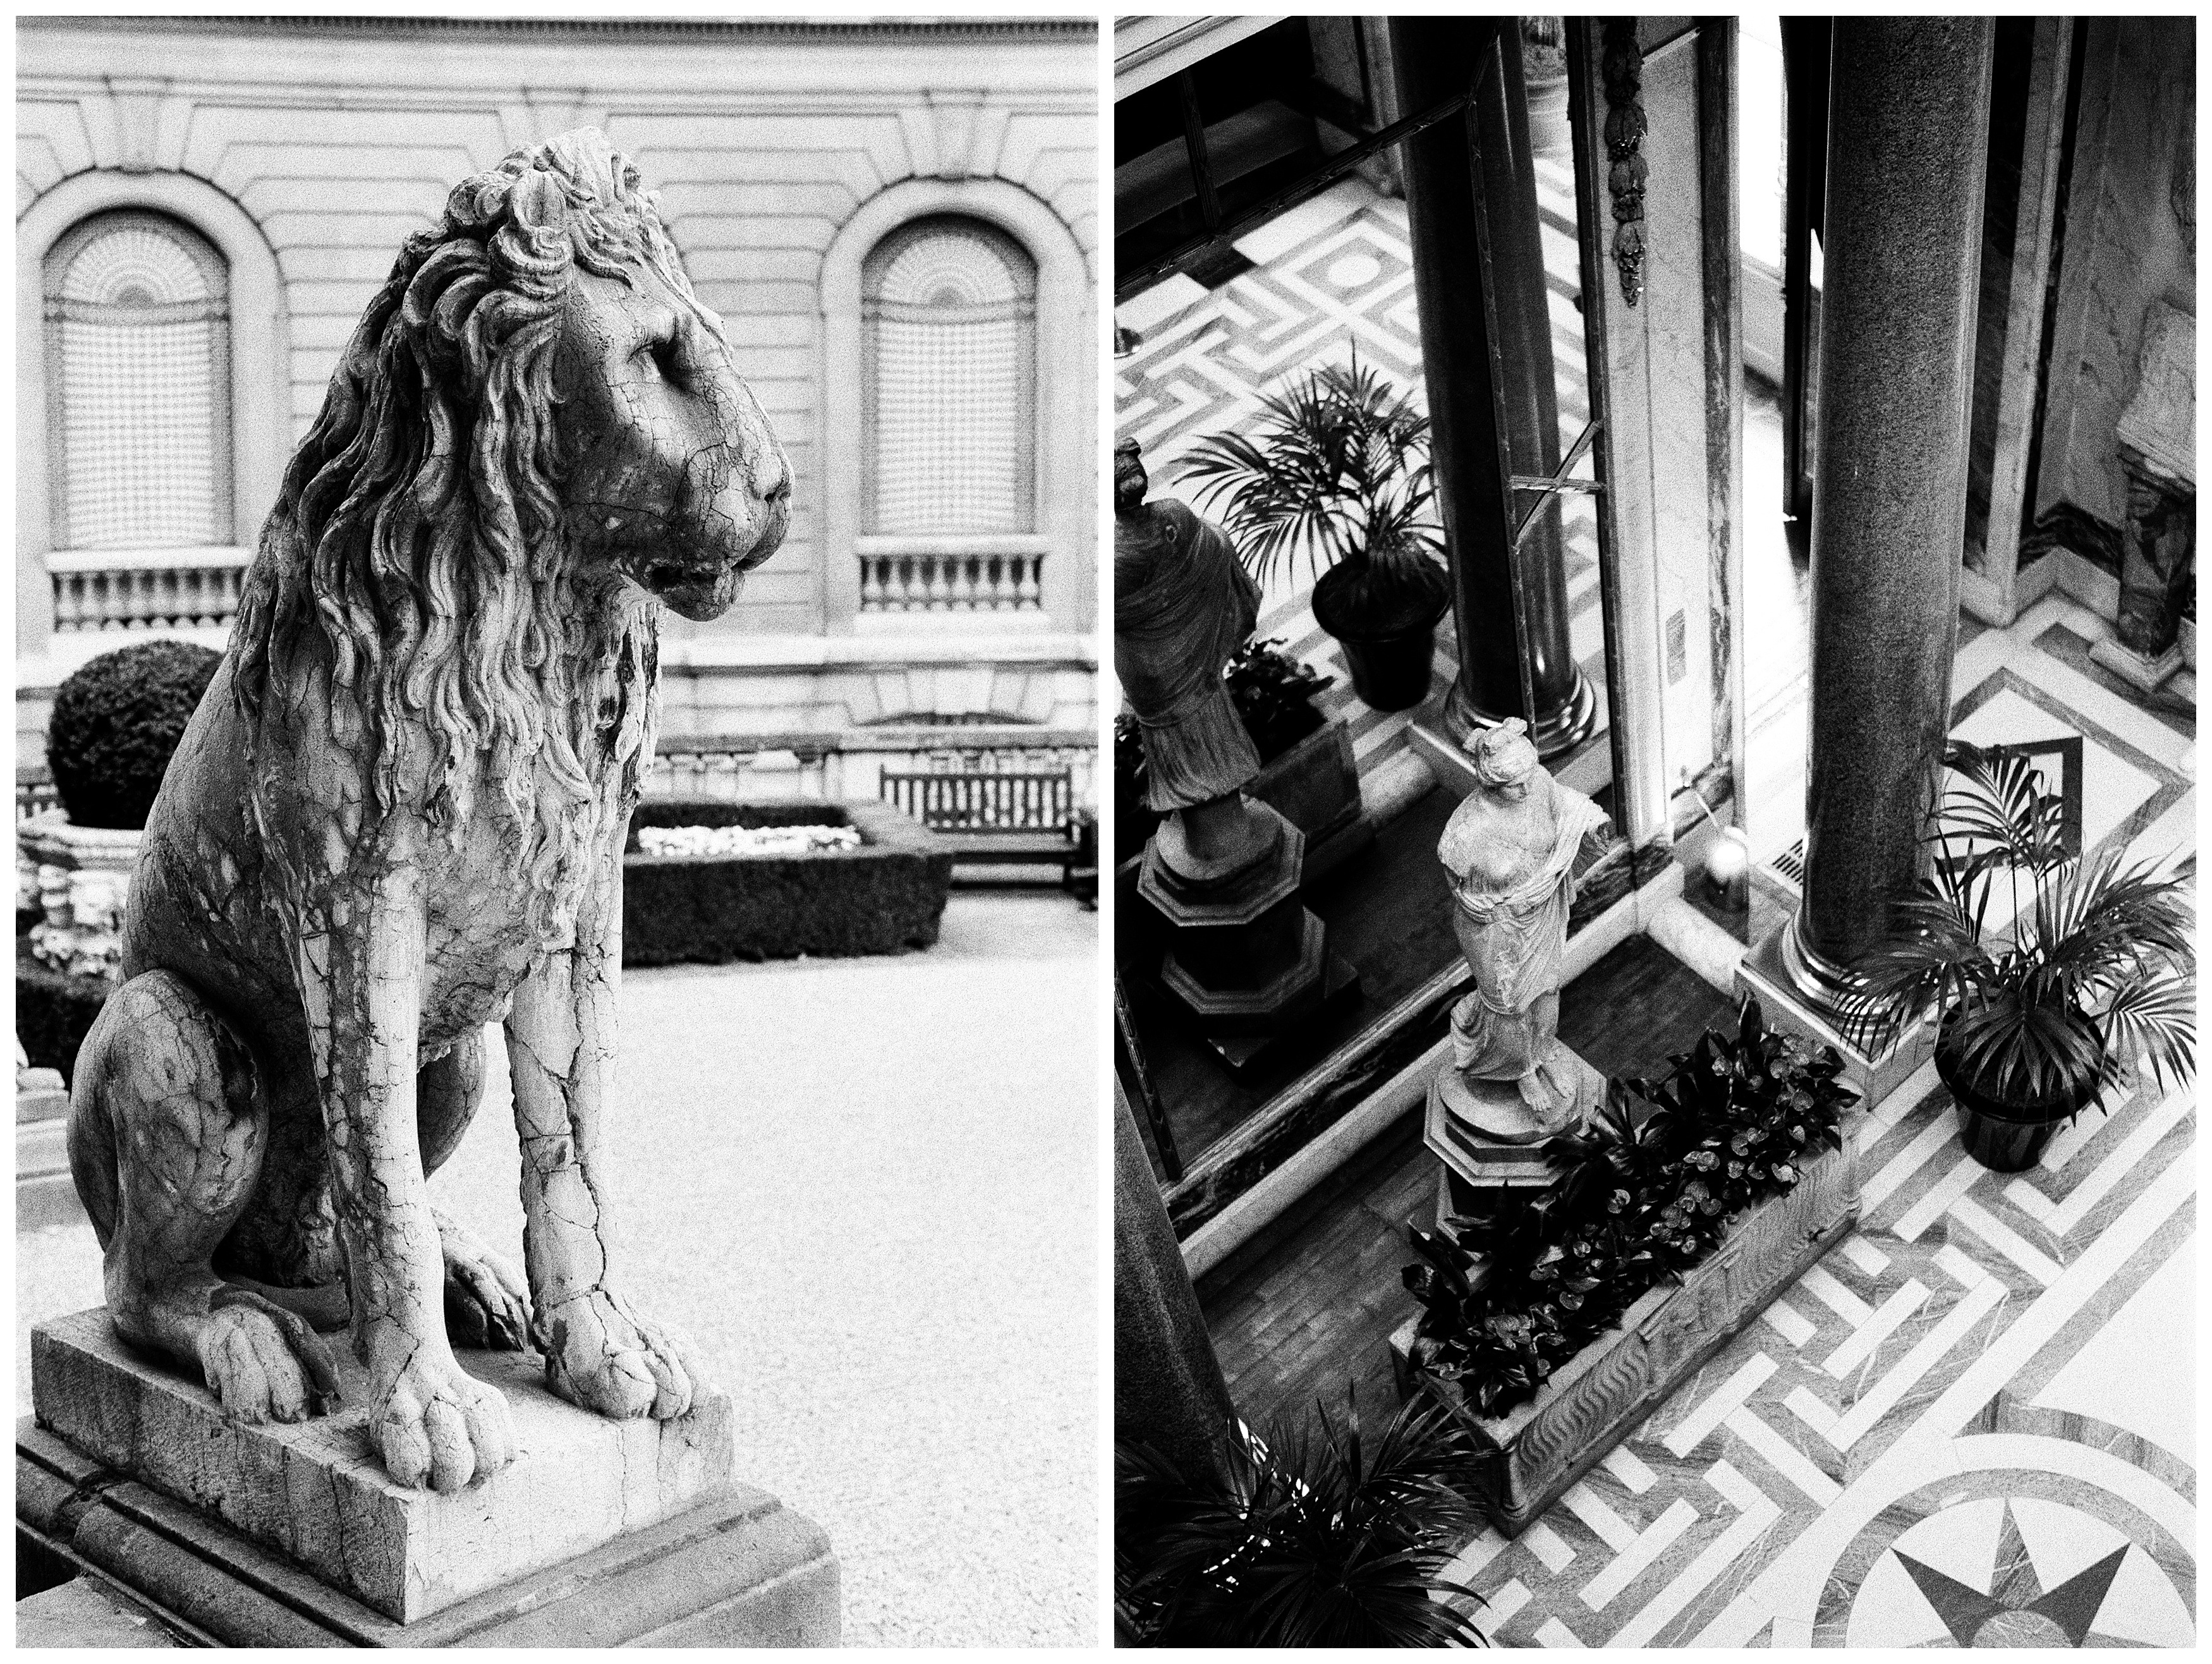 large sculpture of a lion and statue of a woman at the musée jacquemart-andré